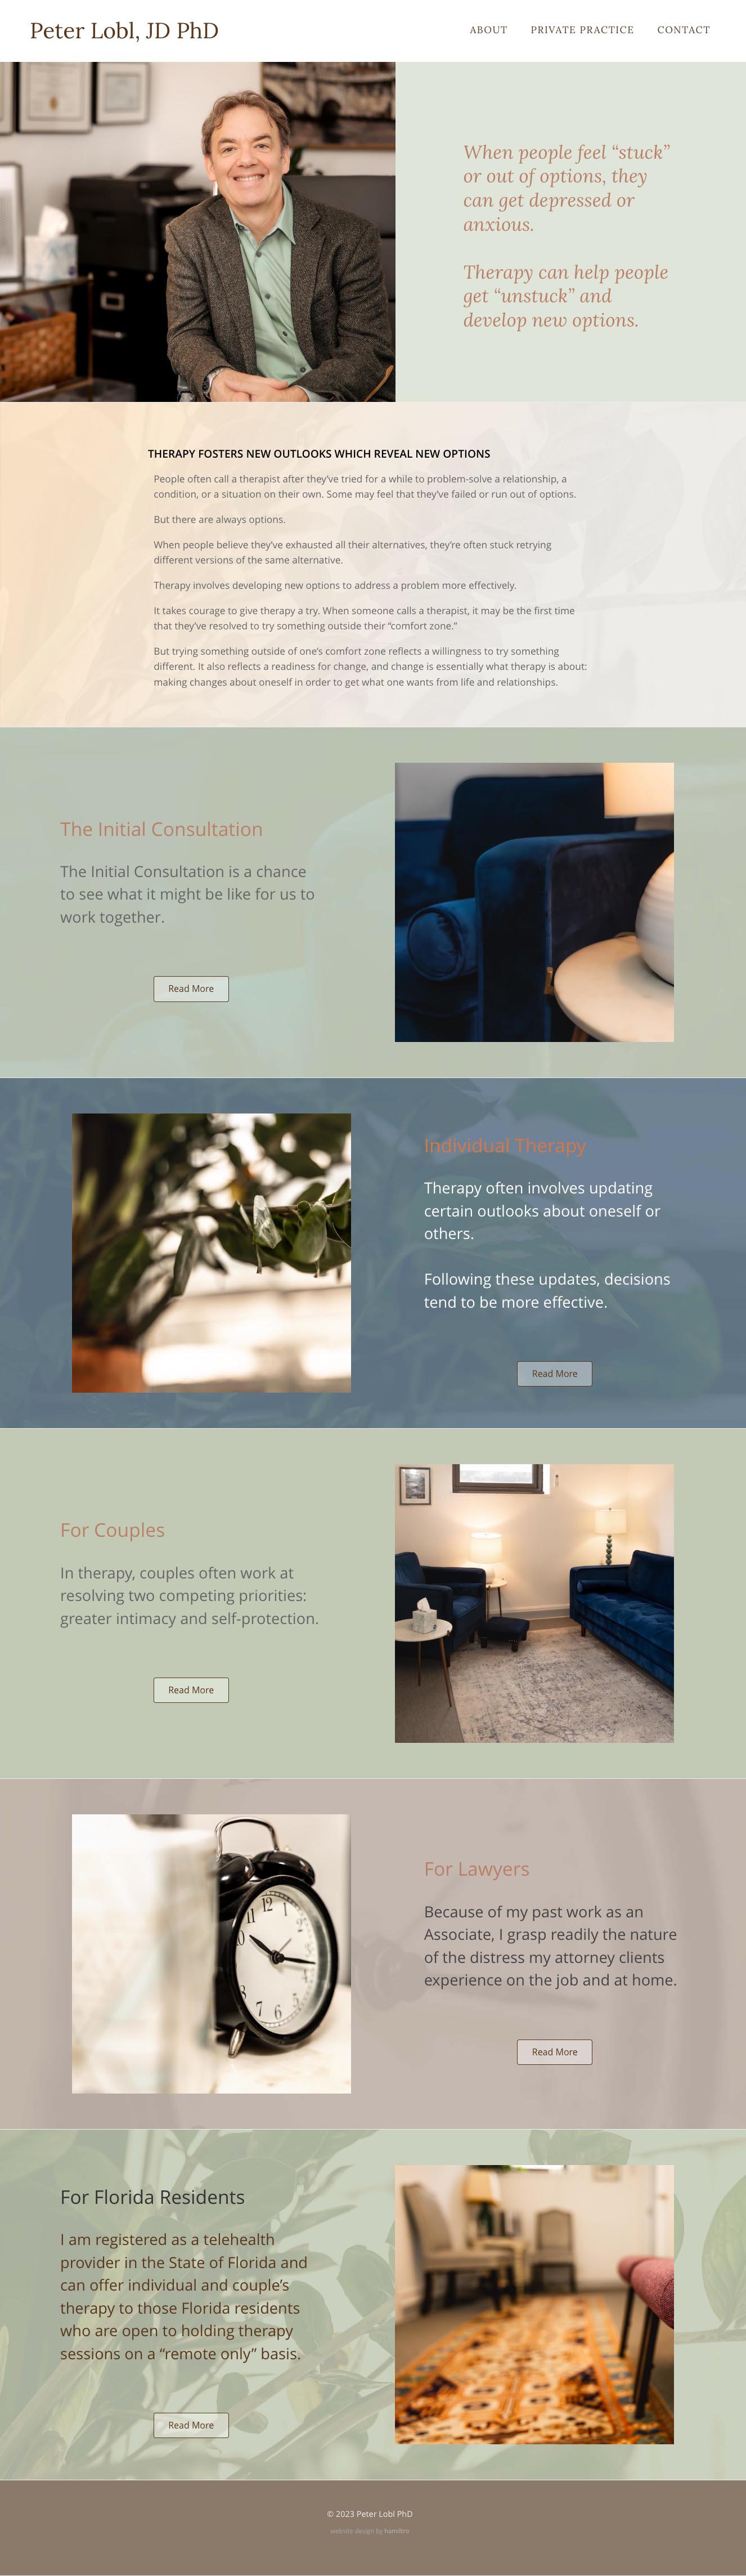 website design for therapists-coaches - We designed this website for a therapist who wanted to focus on establishing trust and understanding—essential to attracting new clients.																																														 - long-scrolling page with rich visual sections making the website delightful to use.